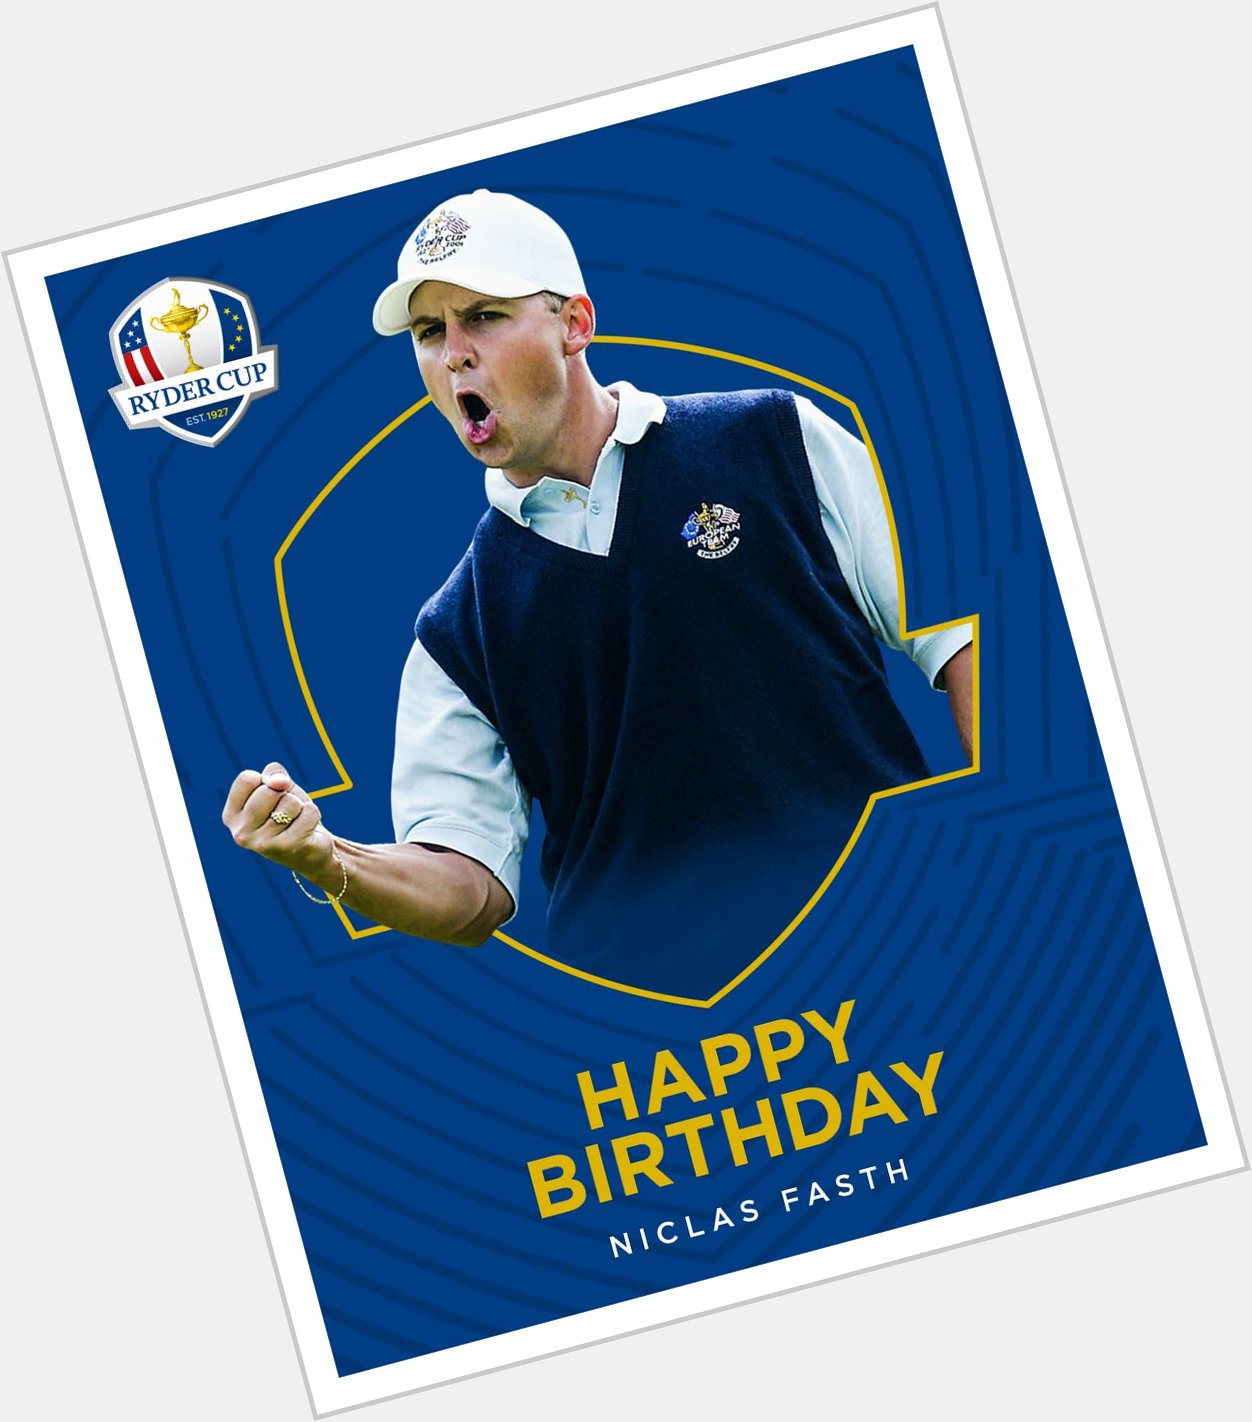 Happy birthday to 2002 Ryder Cup winner Niclas Fasth 